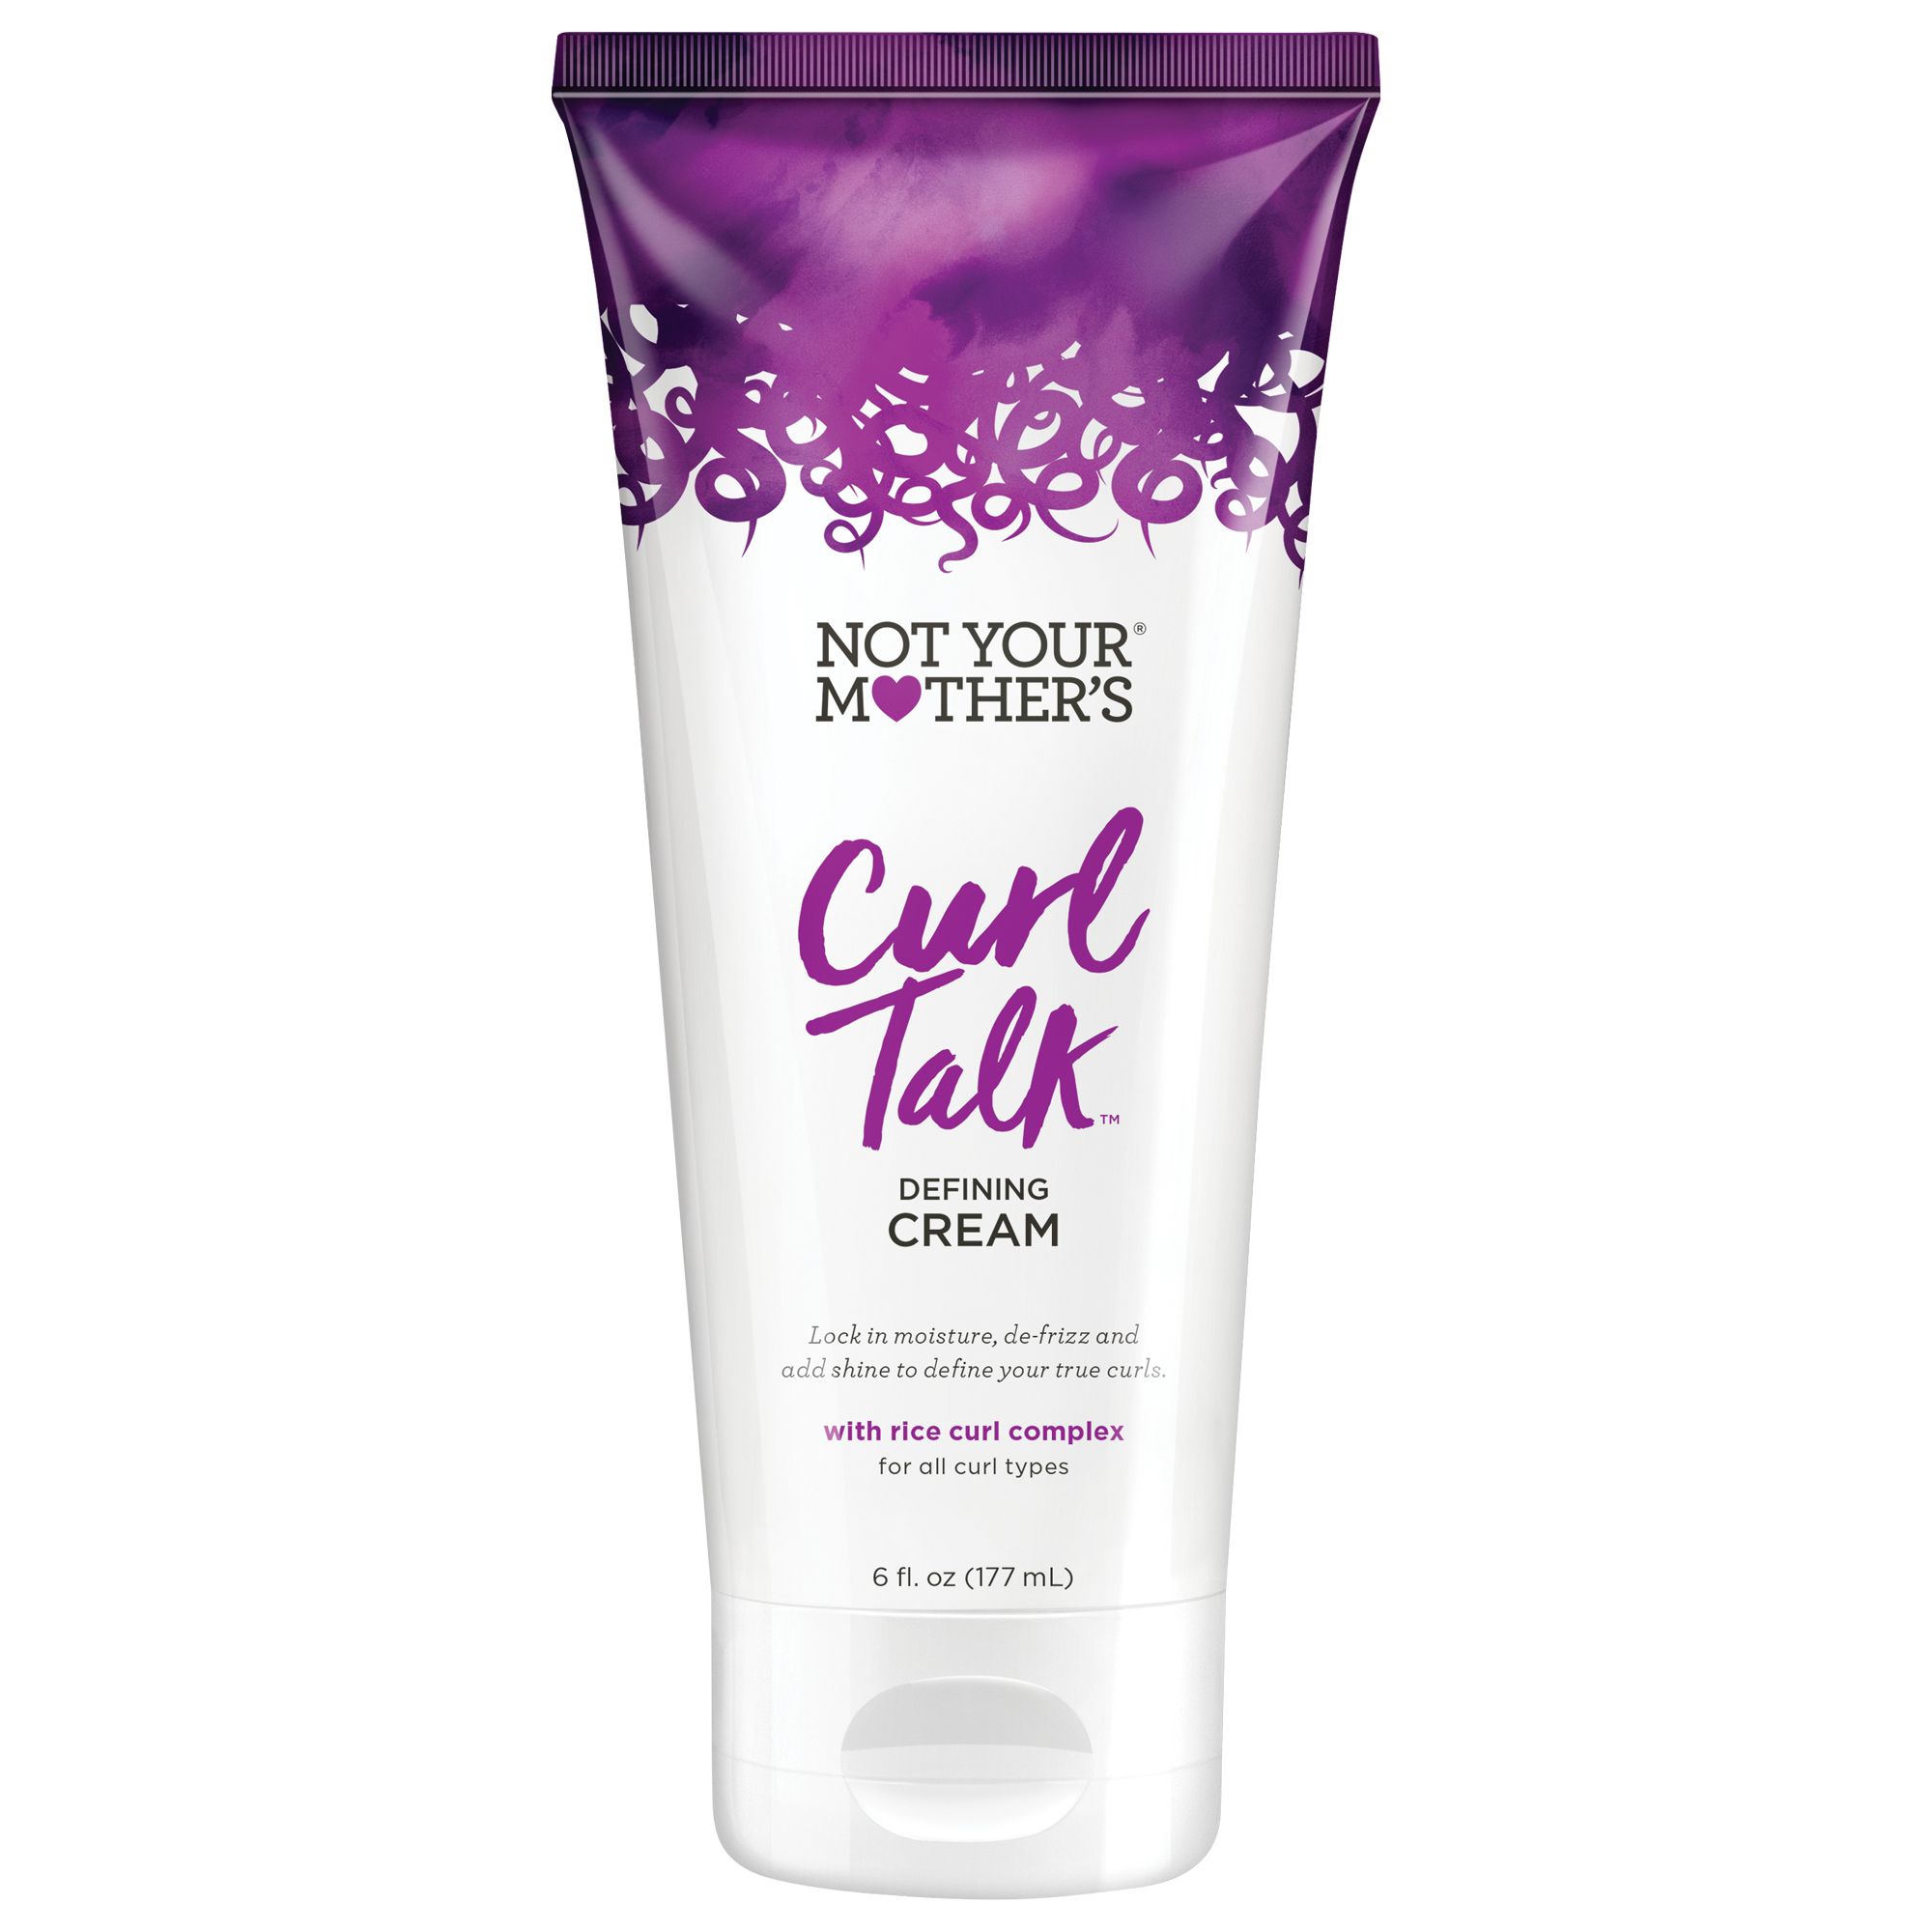 Shop The 17 Best Curl Creams for Healthy, Moisturized Hair